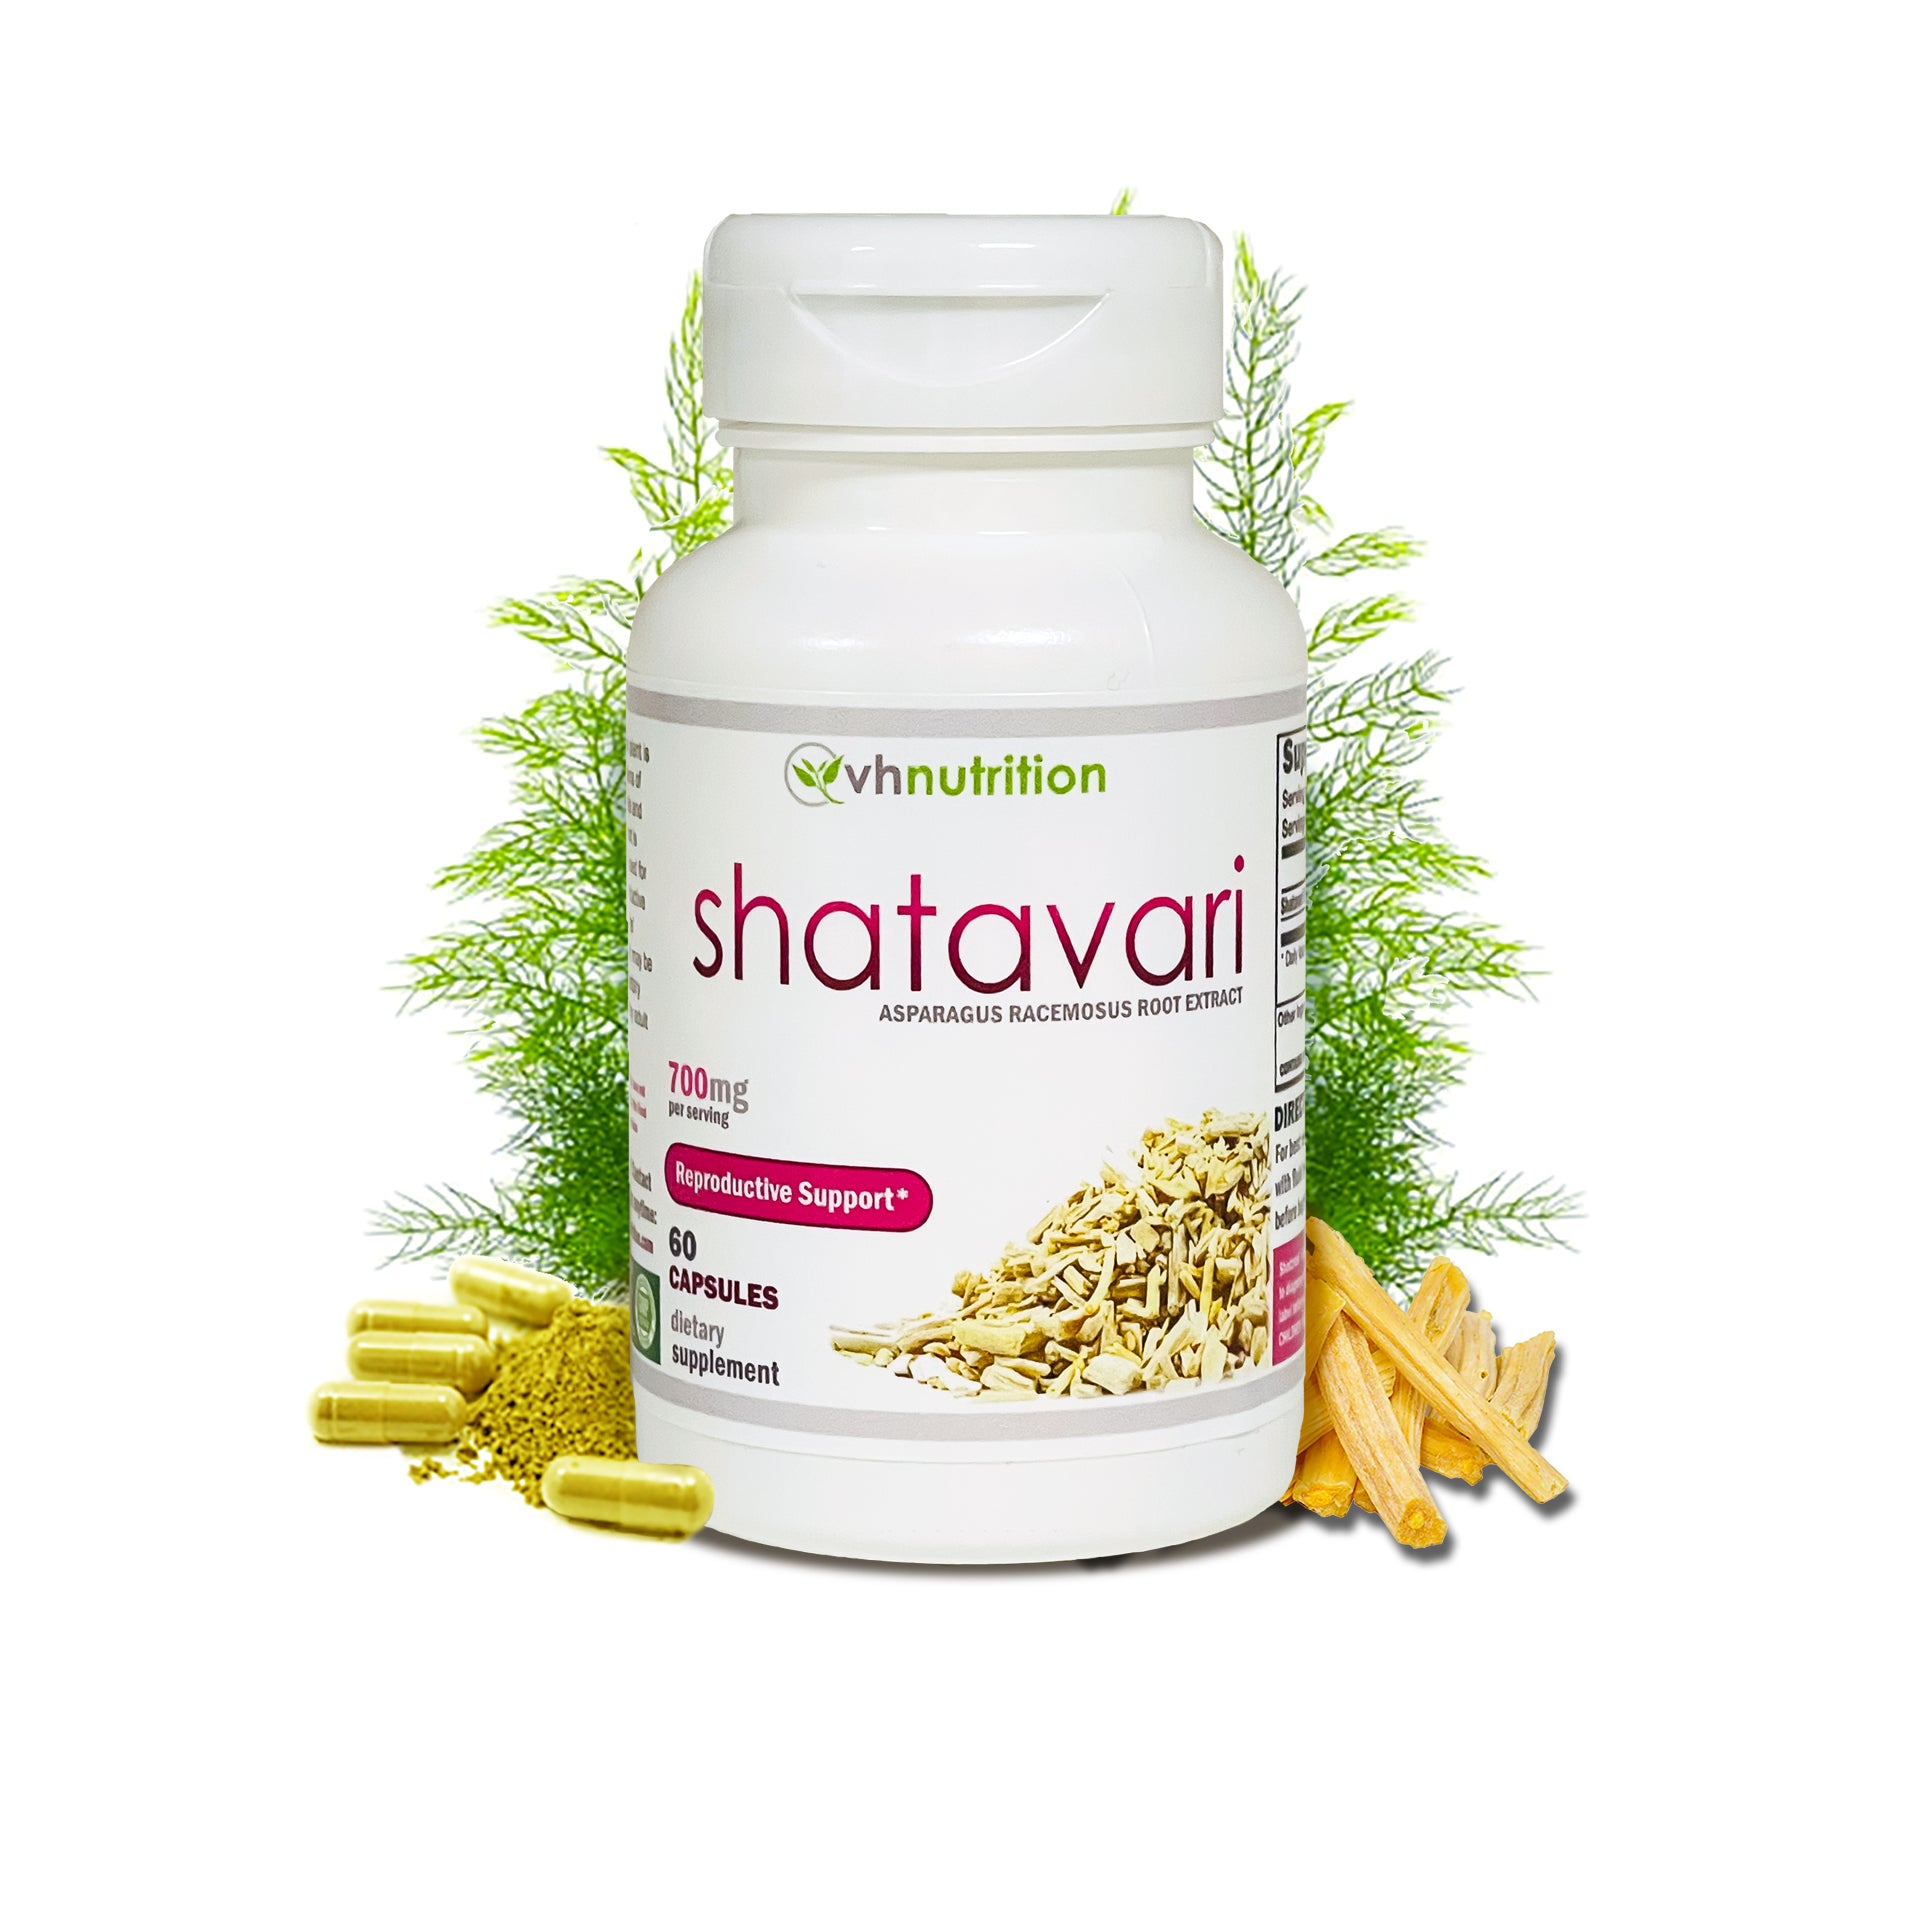 VH Nutrition FEM BOOST STACK | Natural Hormonal, Mood & Reproductive Support* | Shatavari, Maca, Dong Quai | 25% OFF our Regular Price